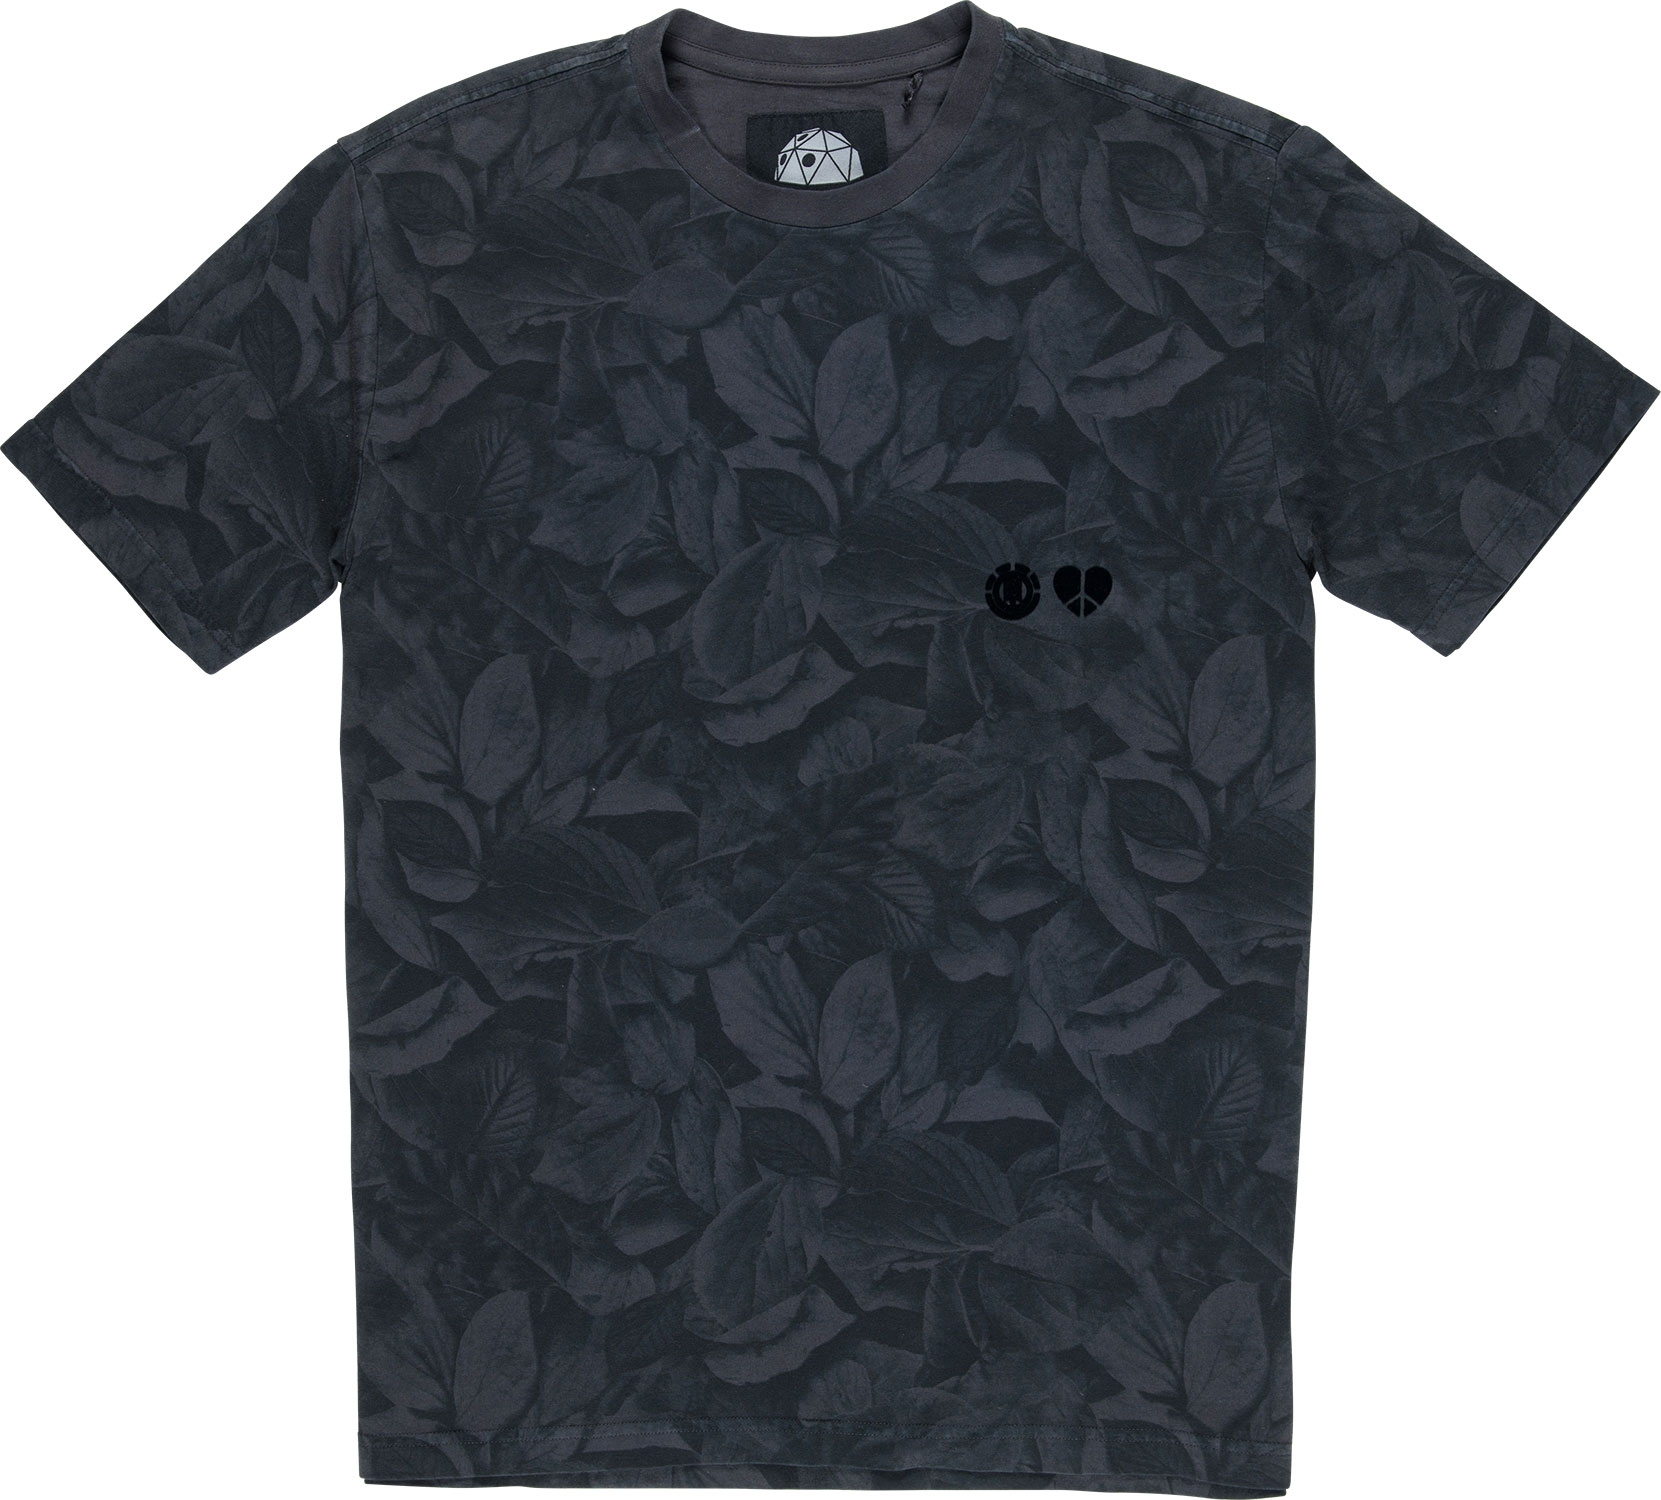 GRIFFIN X ELEMENT LEAF CAMO SS TEE